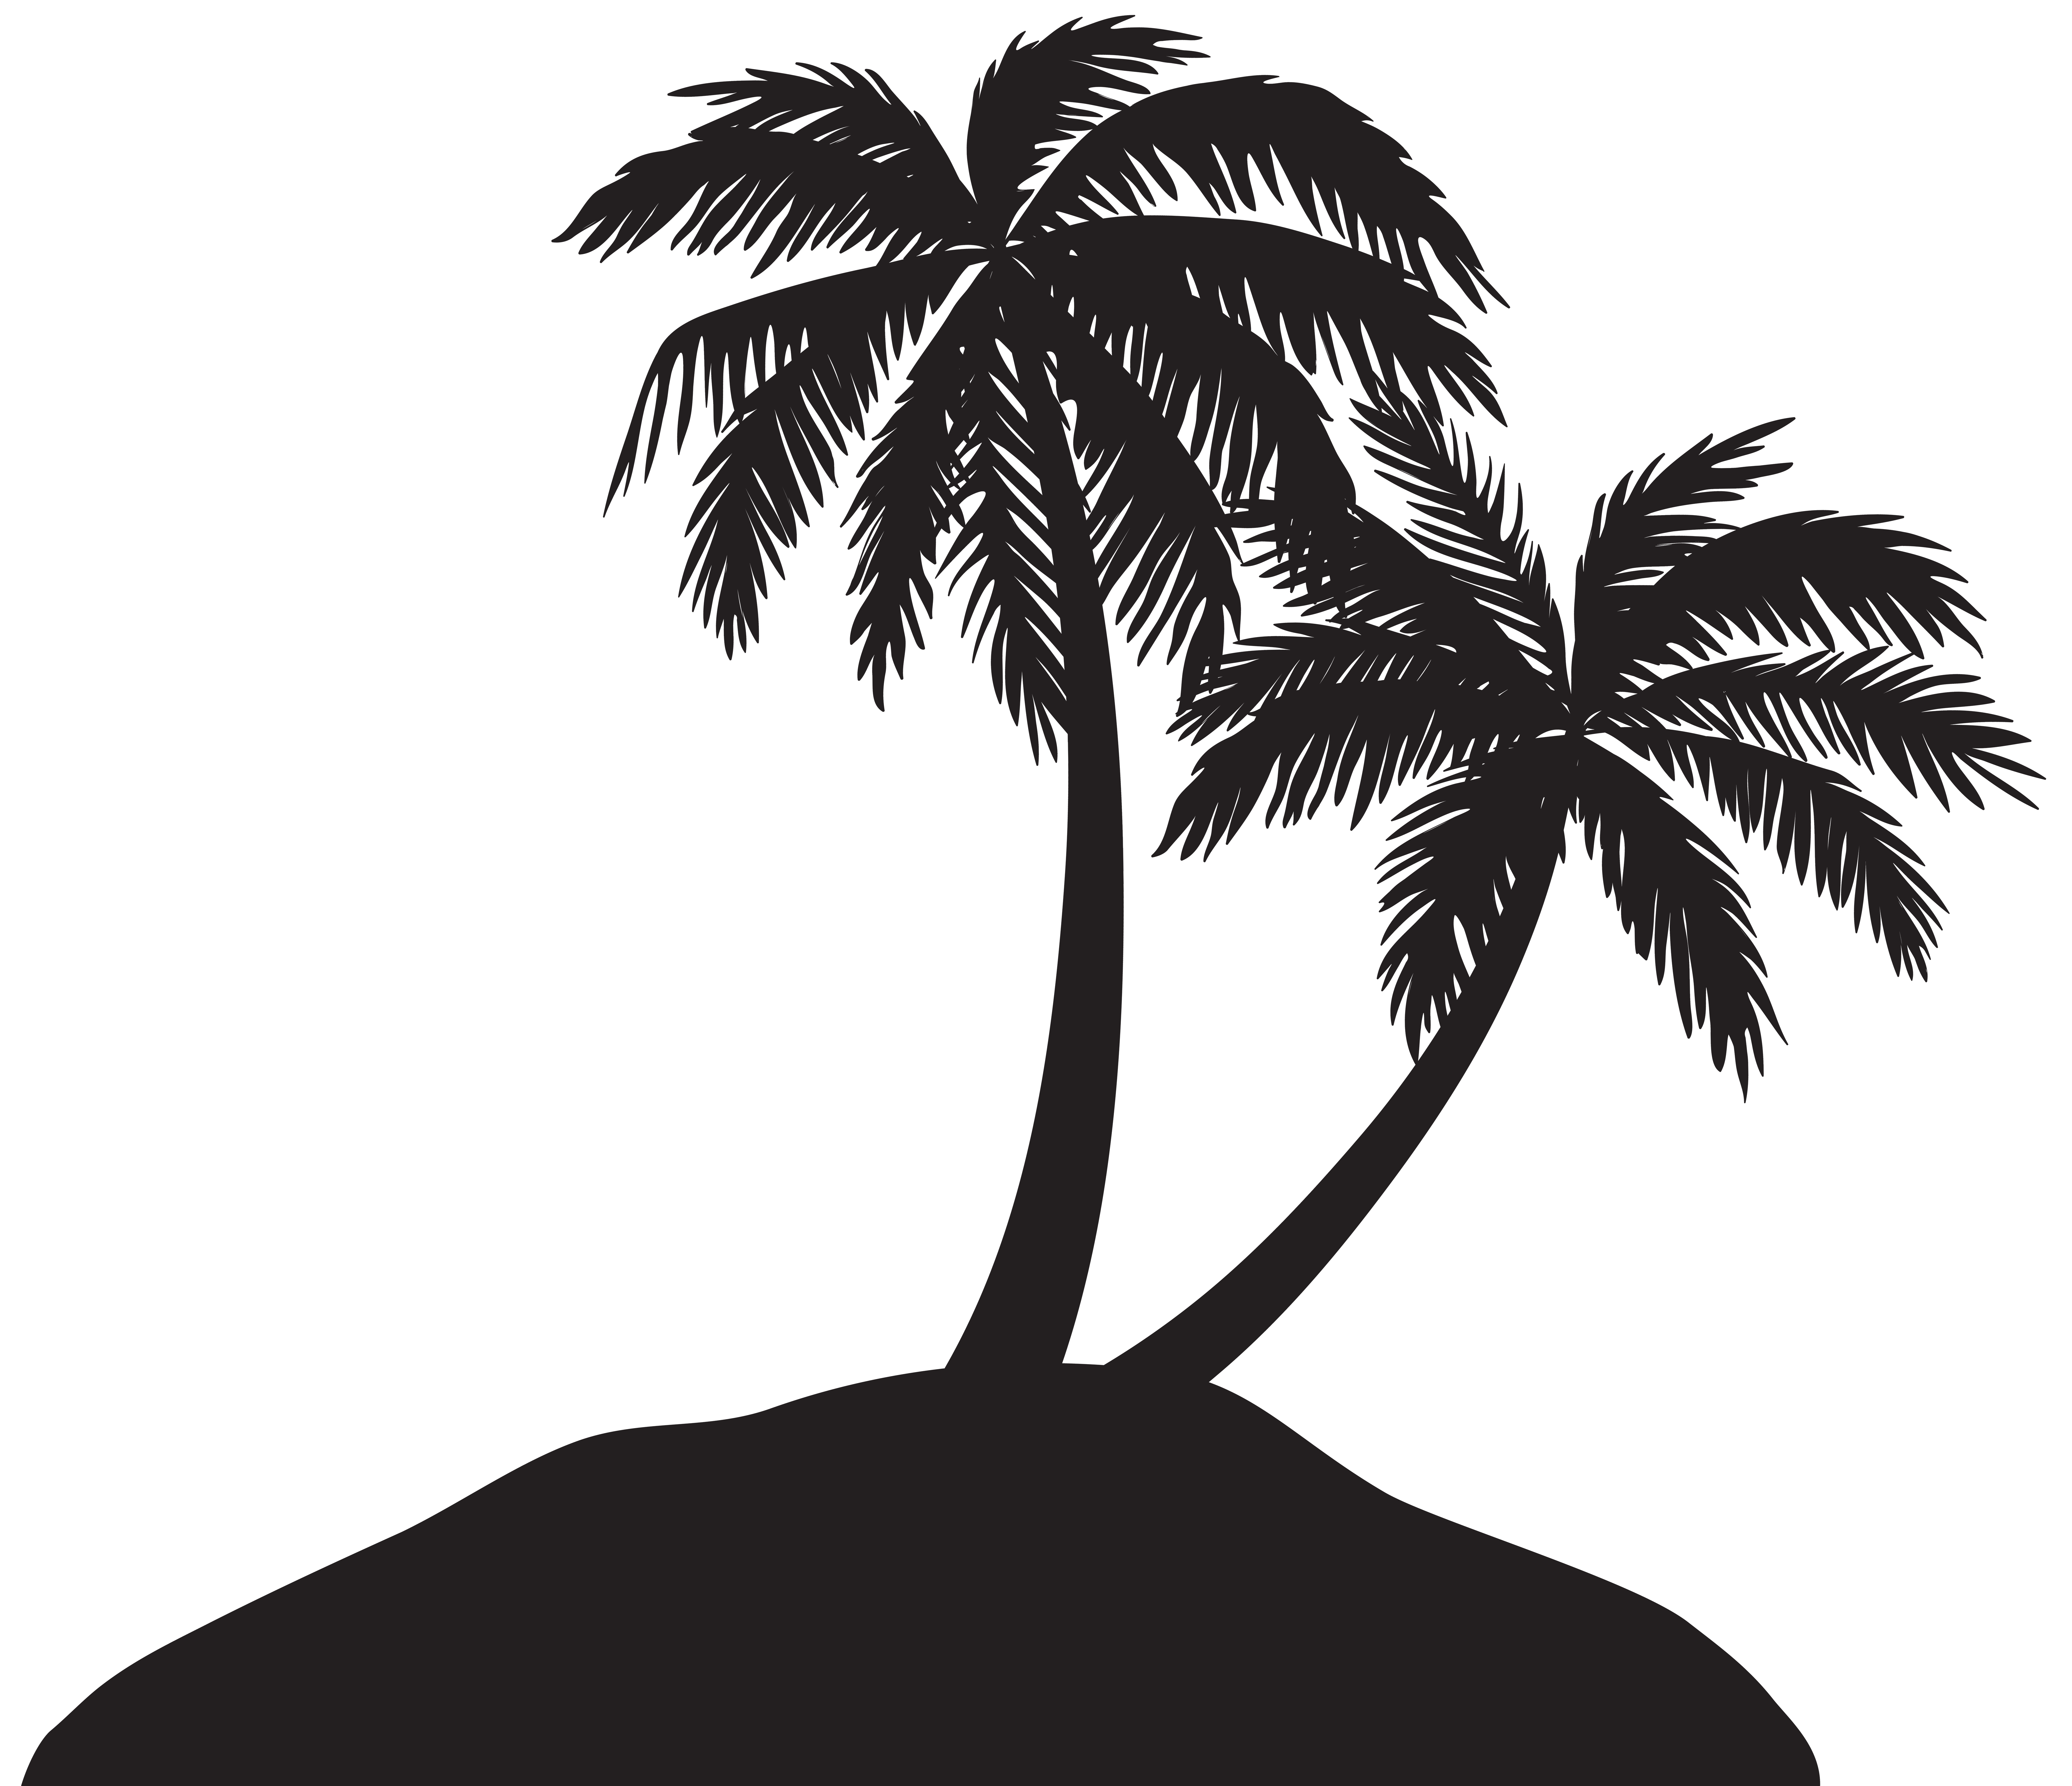 Island clipart clip art. With palm trees silhouette